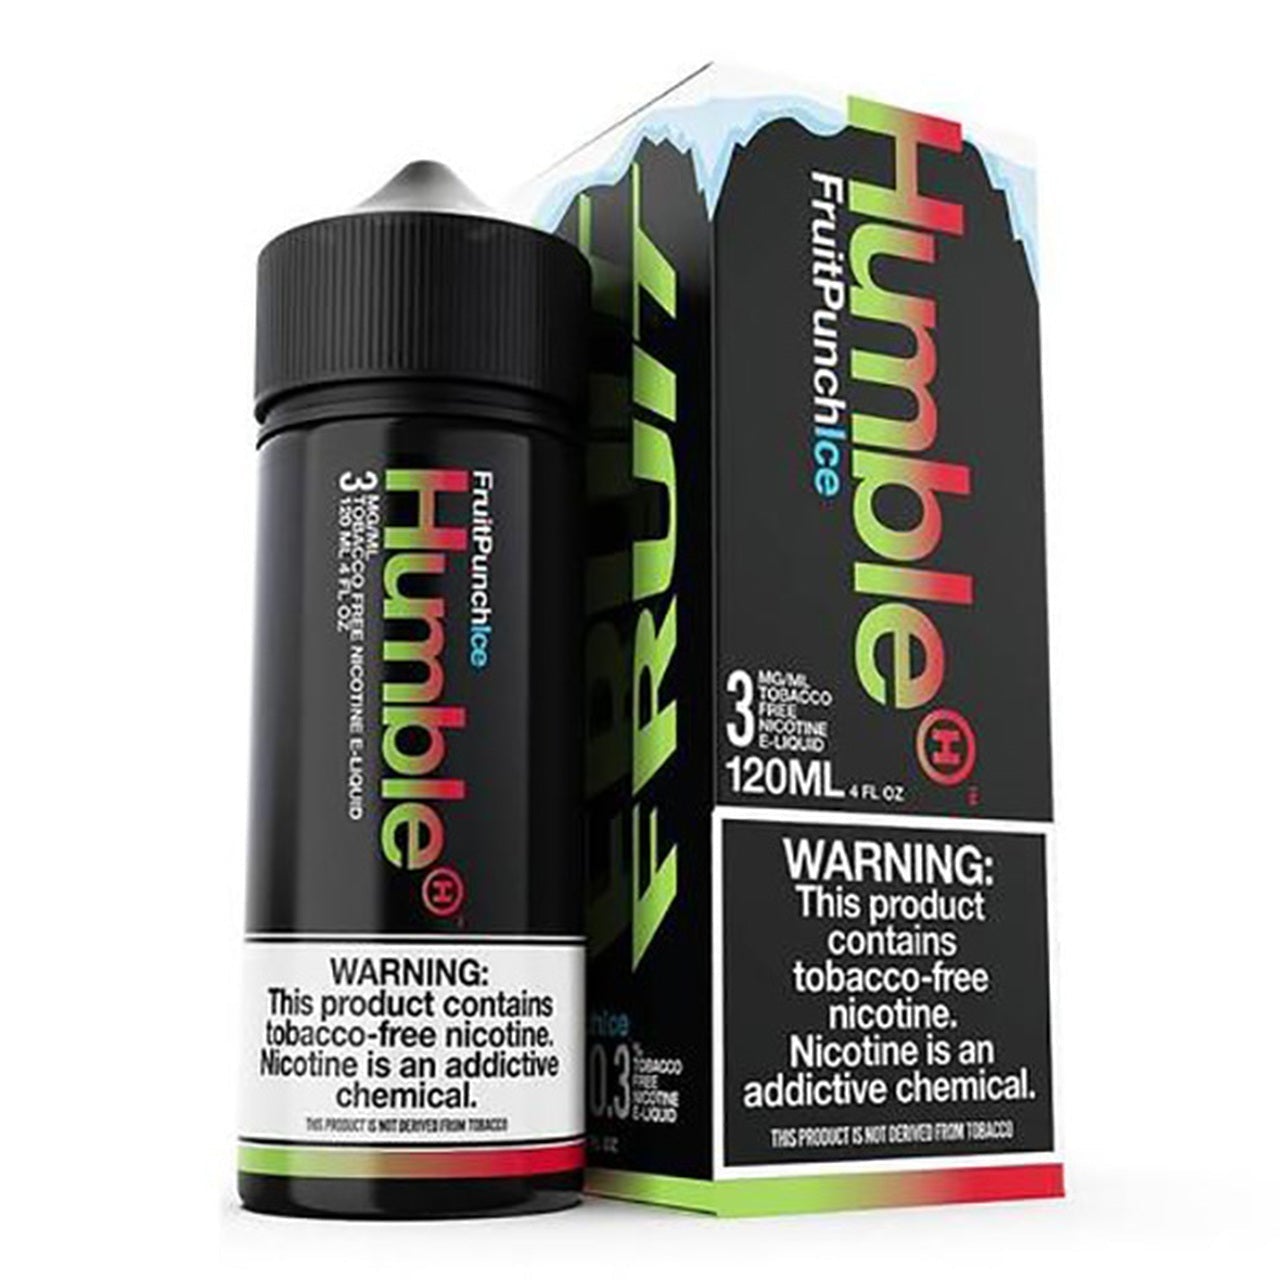 Fruit Punch Ice Tobacco-Free Nicotine By Humble 120ML